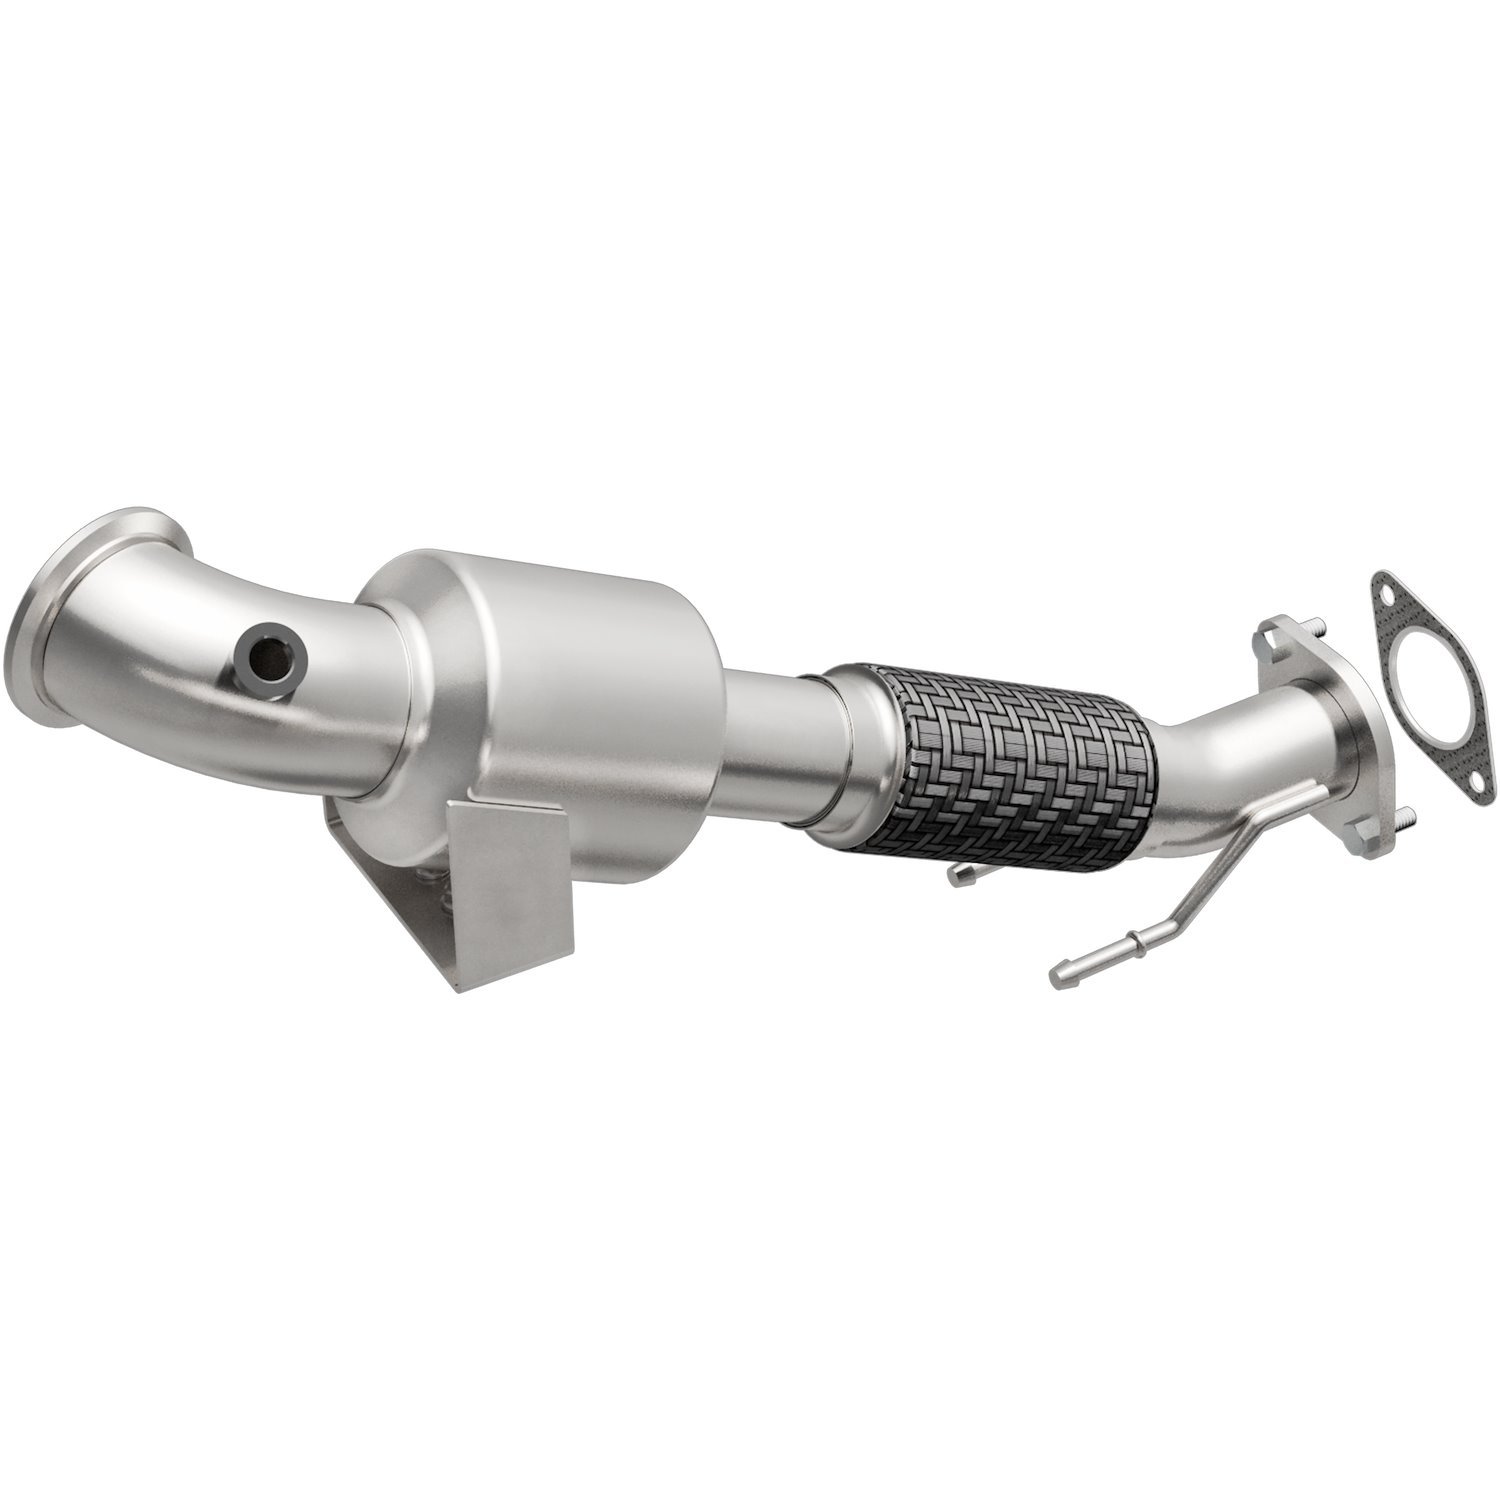 2013-2018 Ford Focus OEM Grade Federal / EPA Compliant Direct-Fit Catalytic Converter